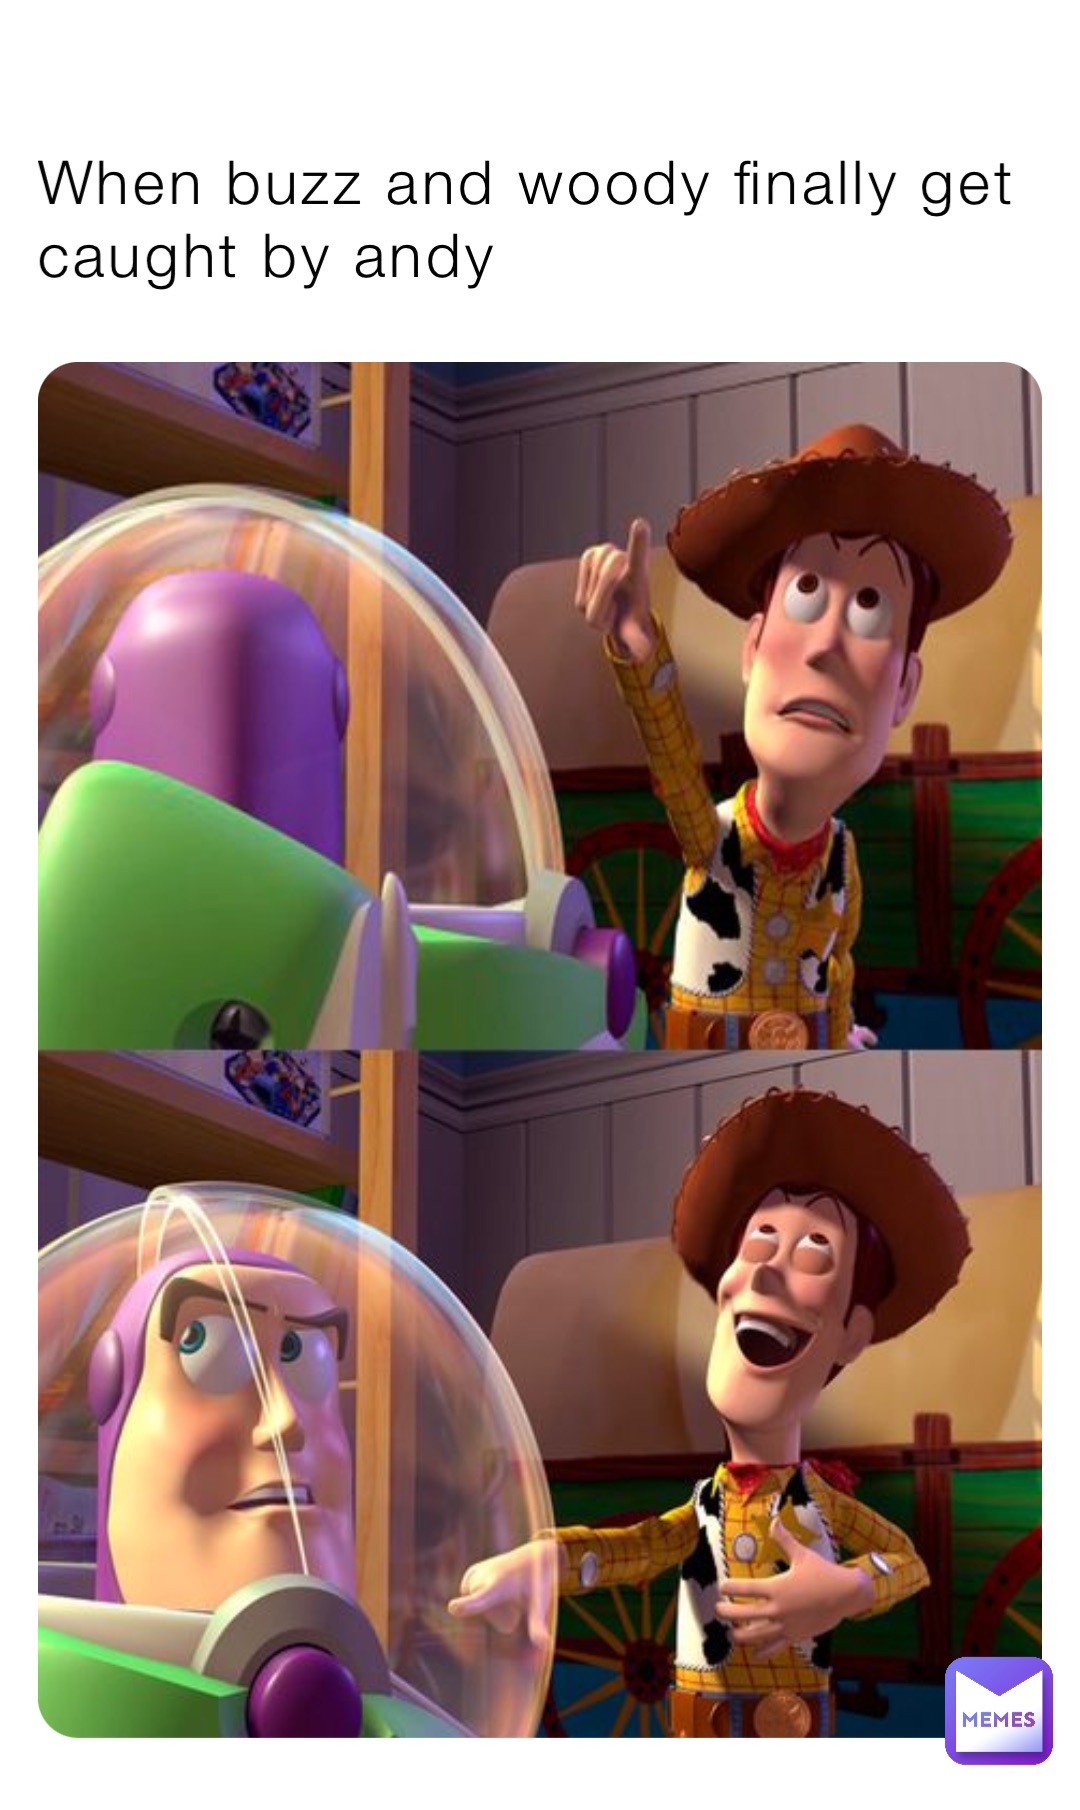 When buzz and woody finally get caught by andy